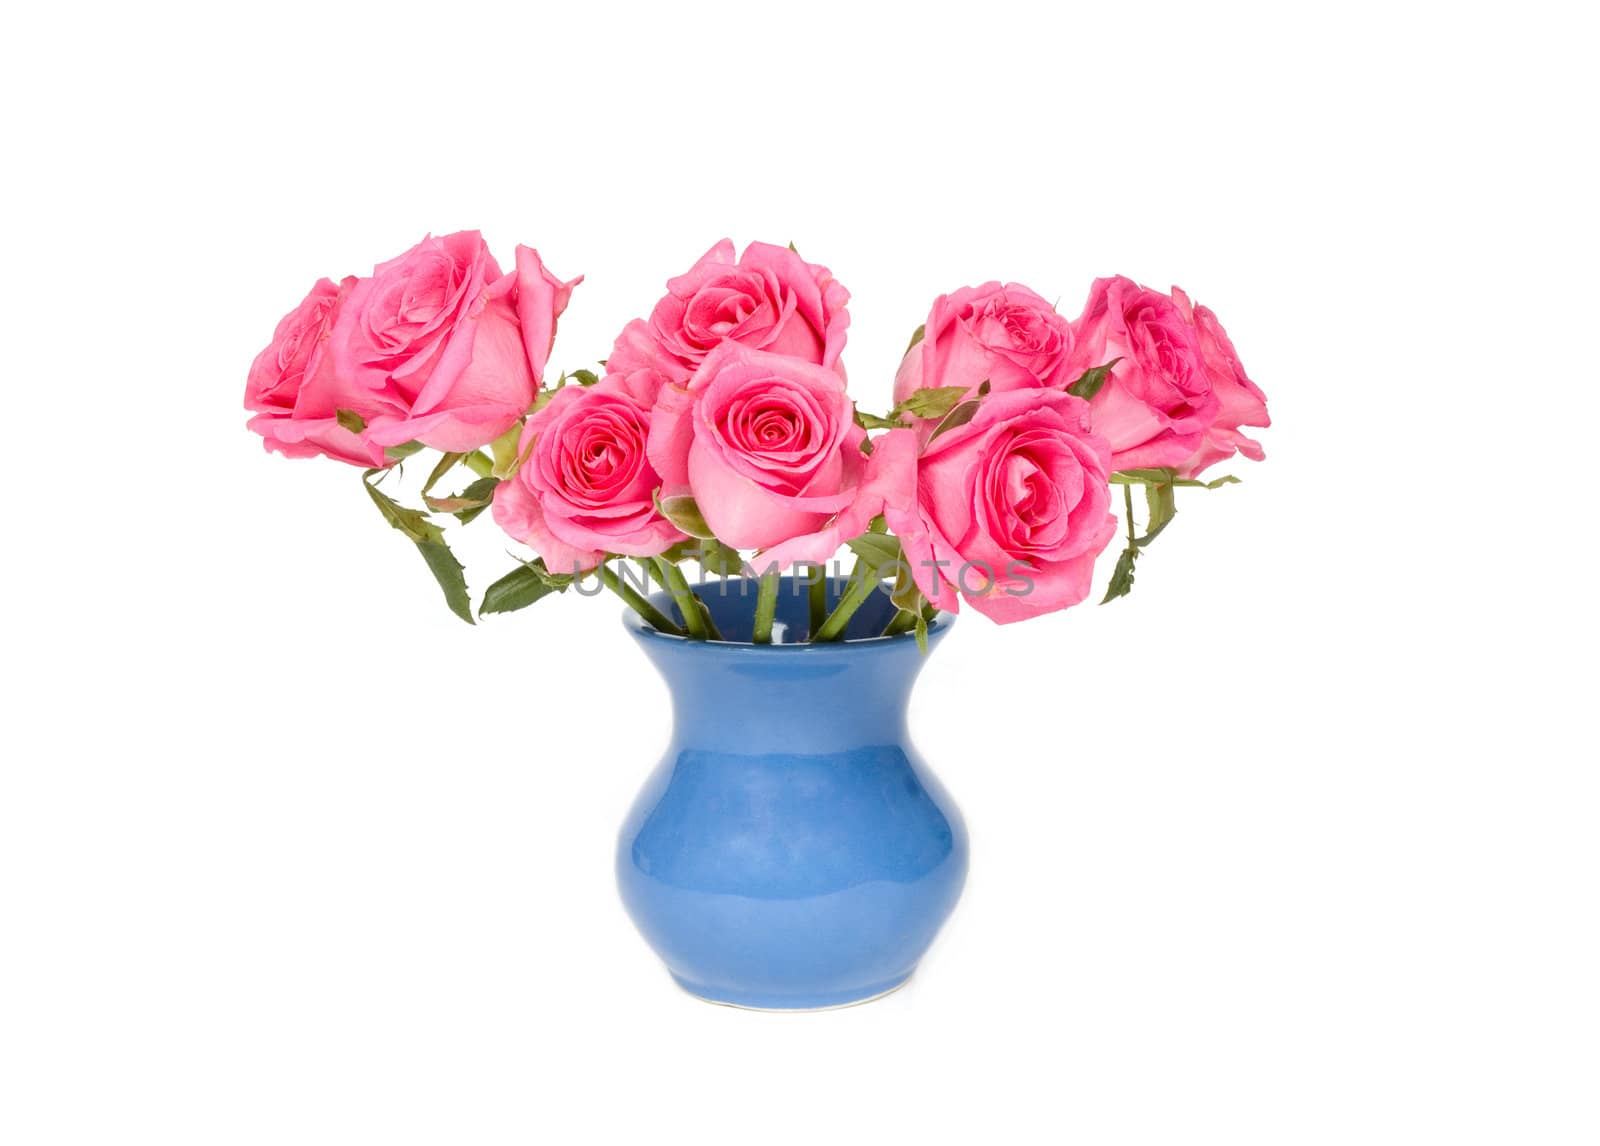  beautiful bouquet colorful pink roses in vase isolated over whi by ladyminnie